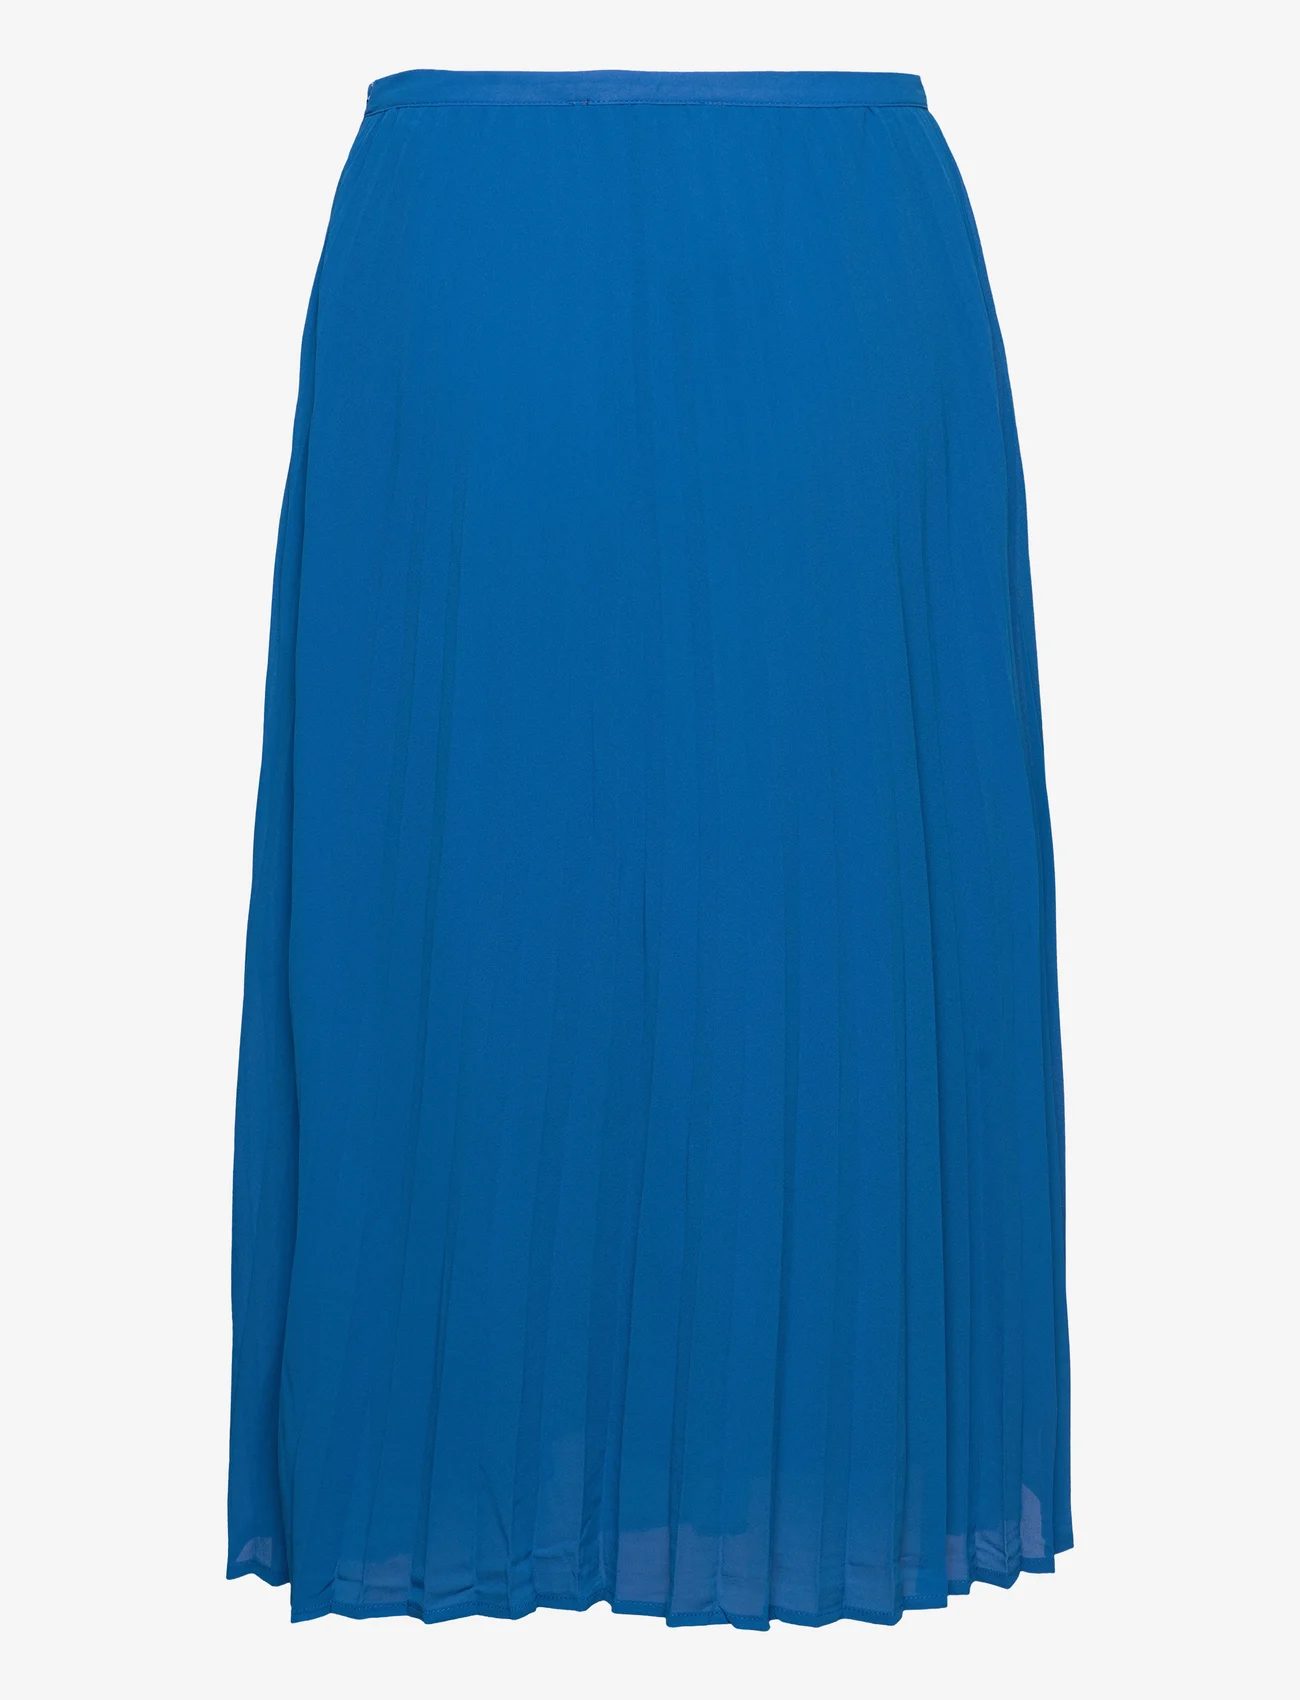 French Connection - PLEAT - midi skirts - bright blue - 1